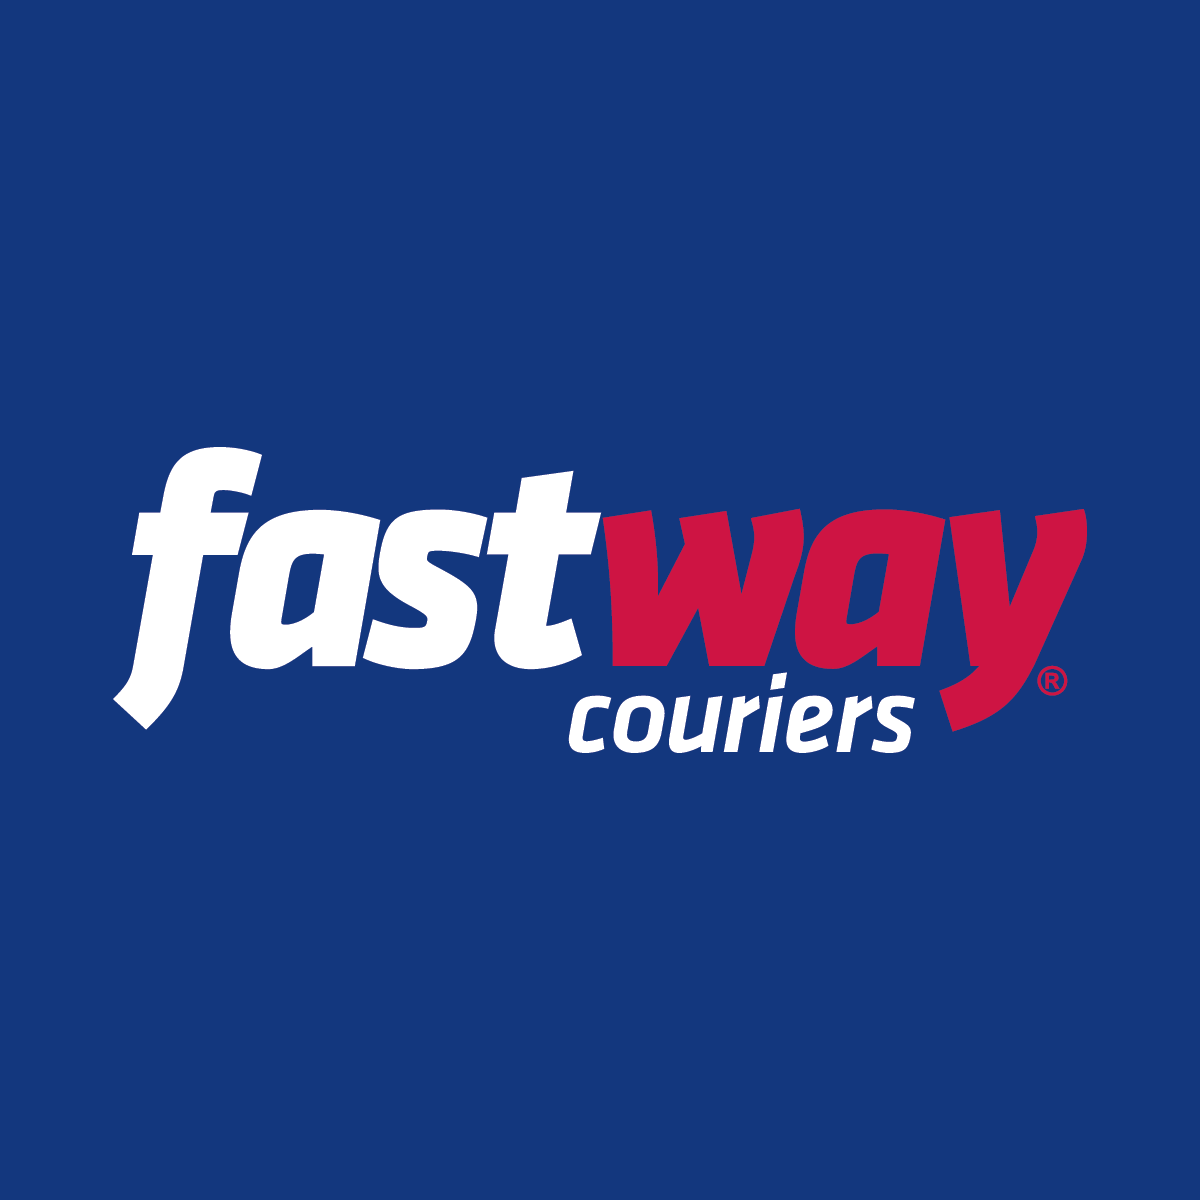 Fastway Couriers for Shopify